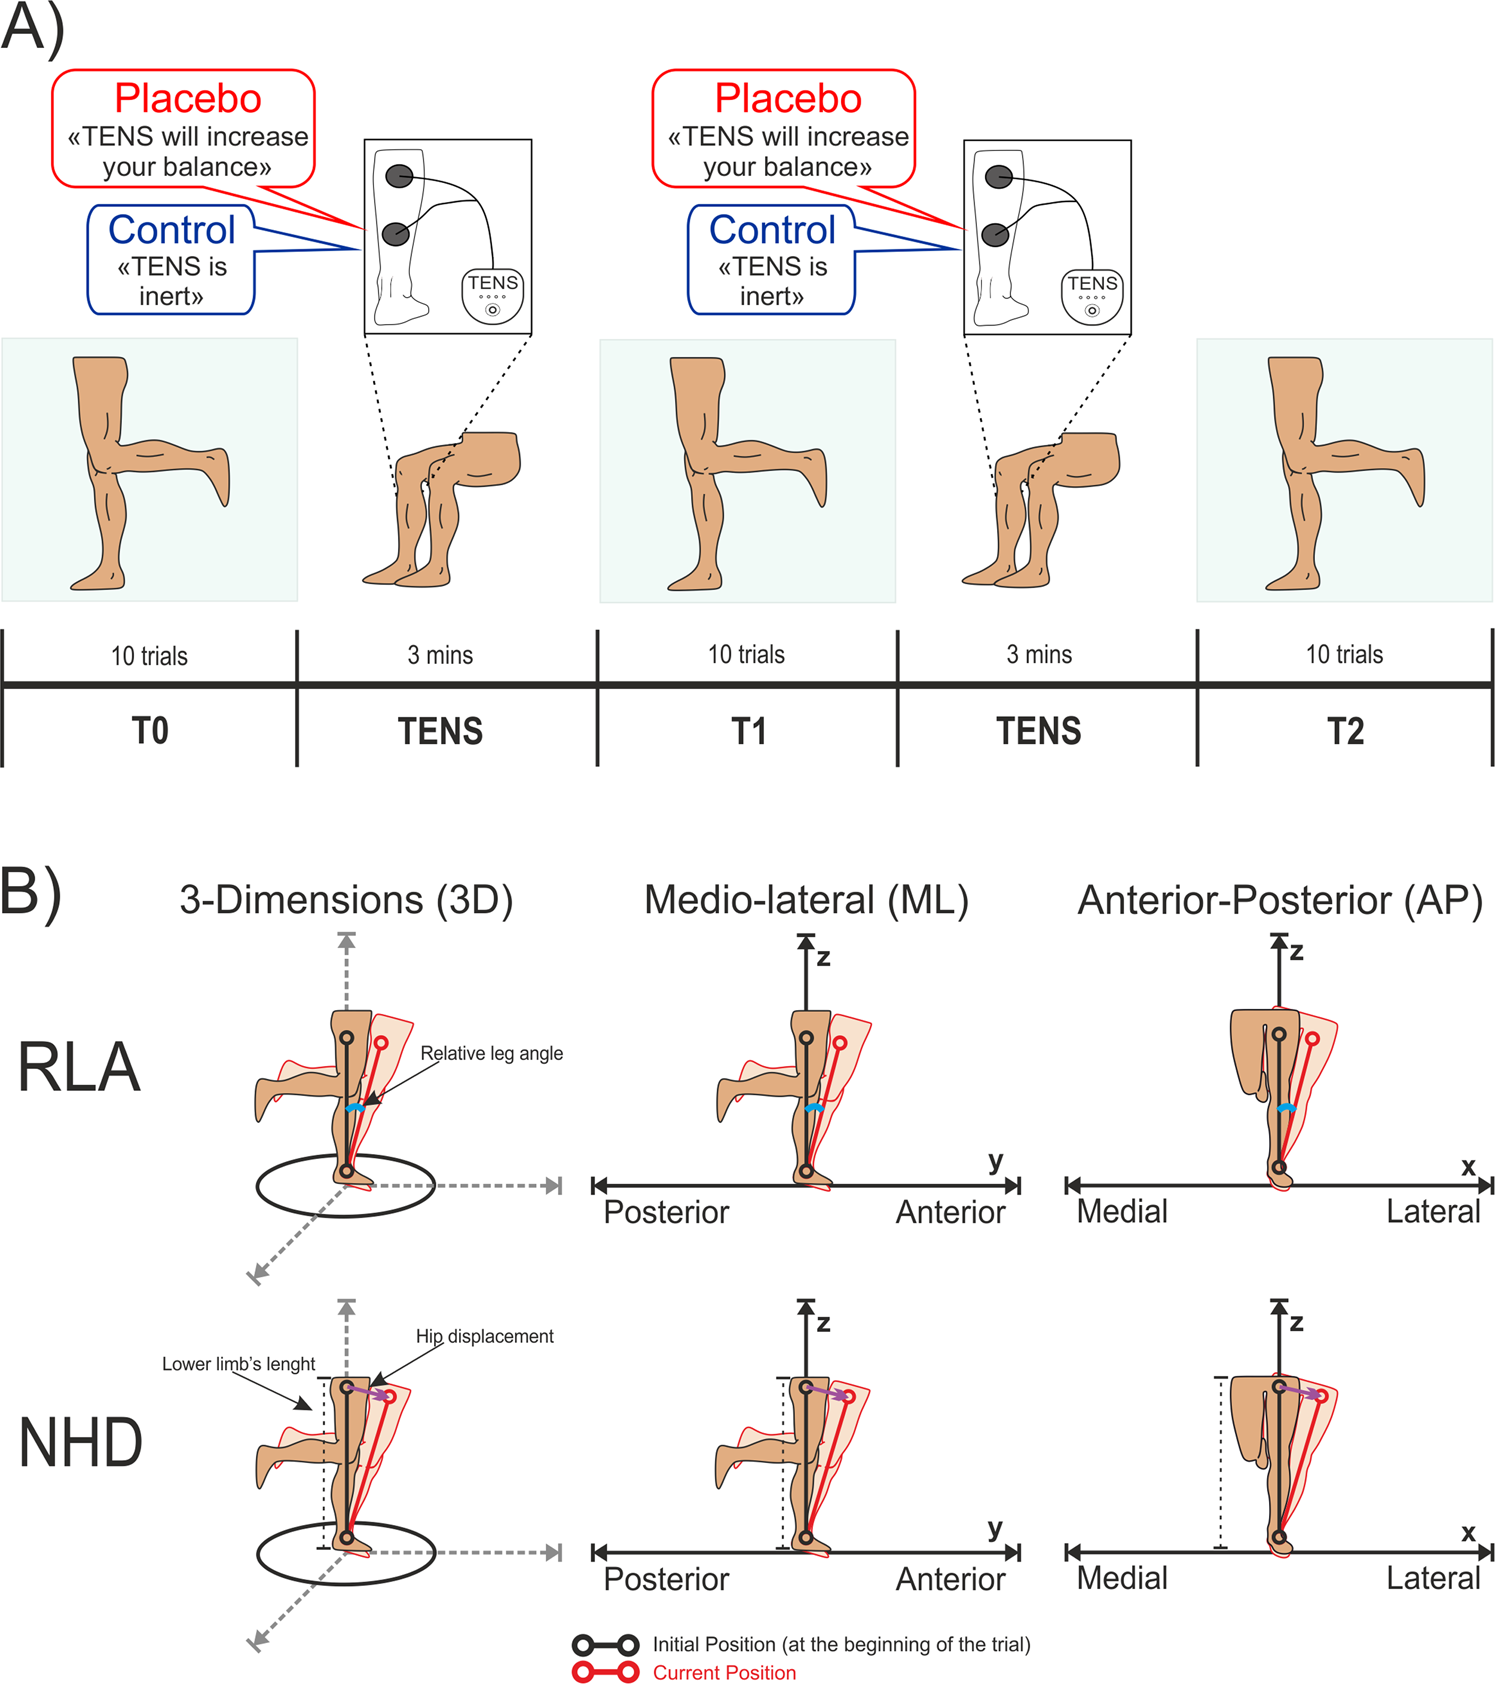 Functional Neuroanatomy for Posture and Gait Control